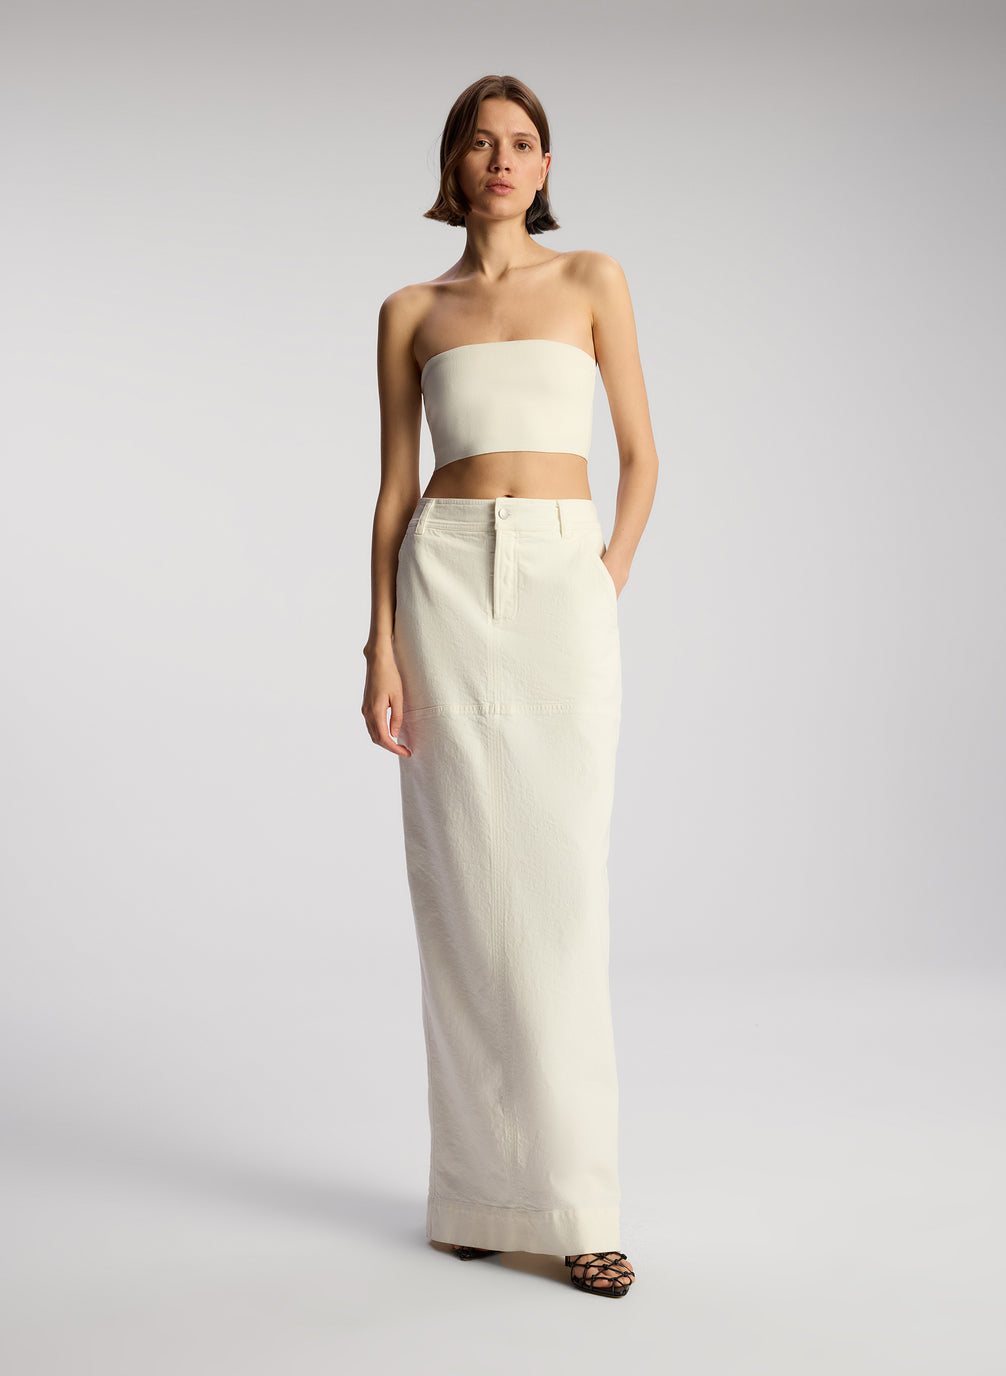 front view of woman wearing off white cropped strapless top with white maxi skirt